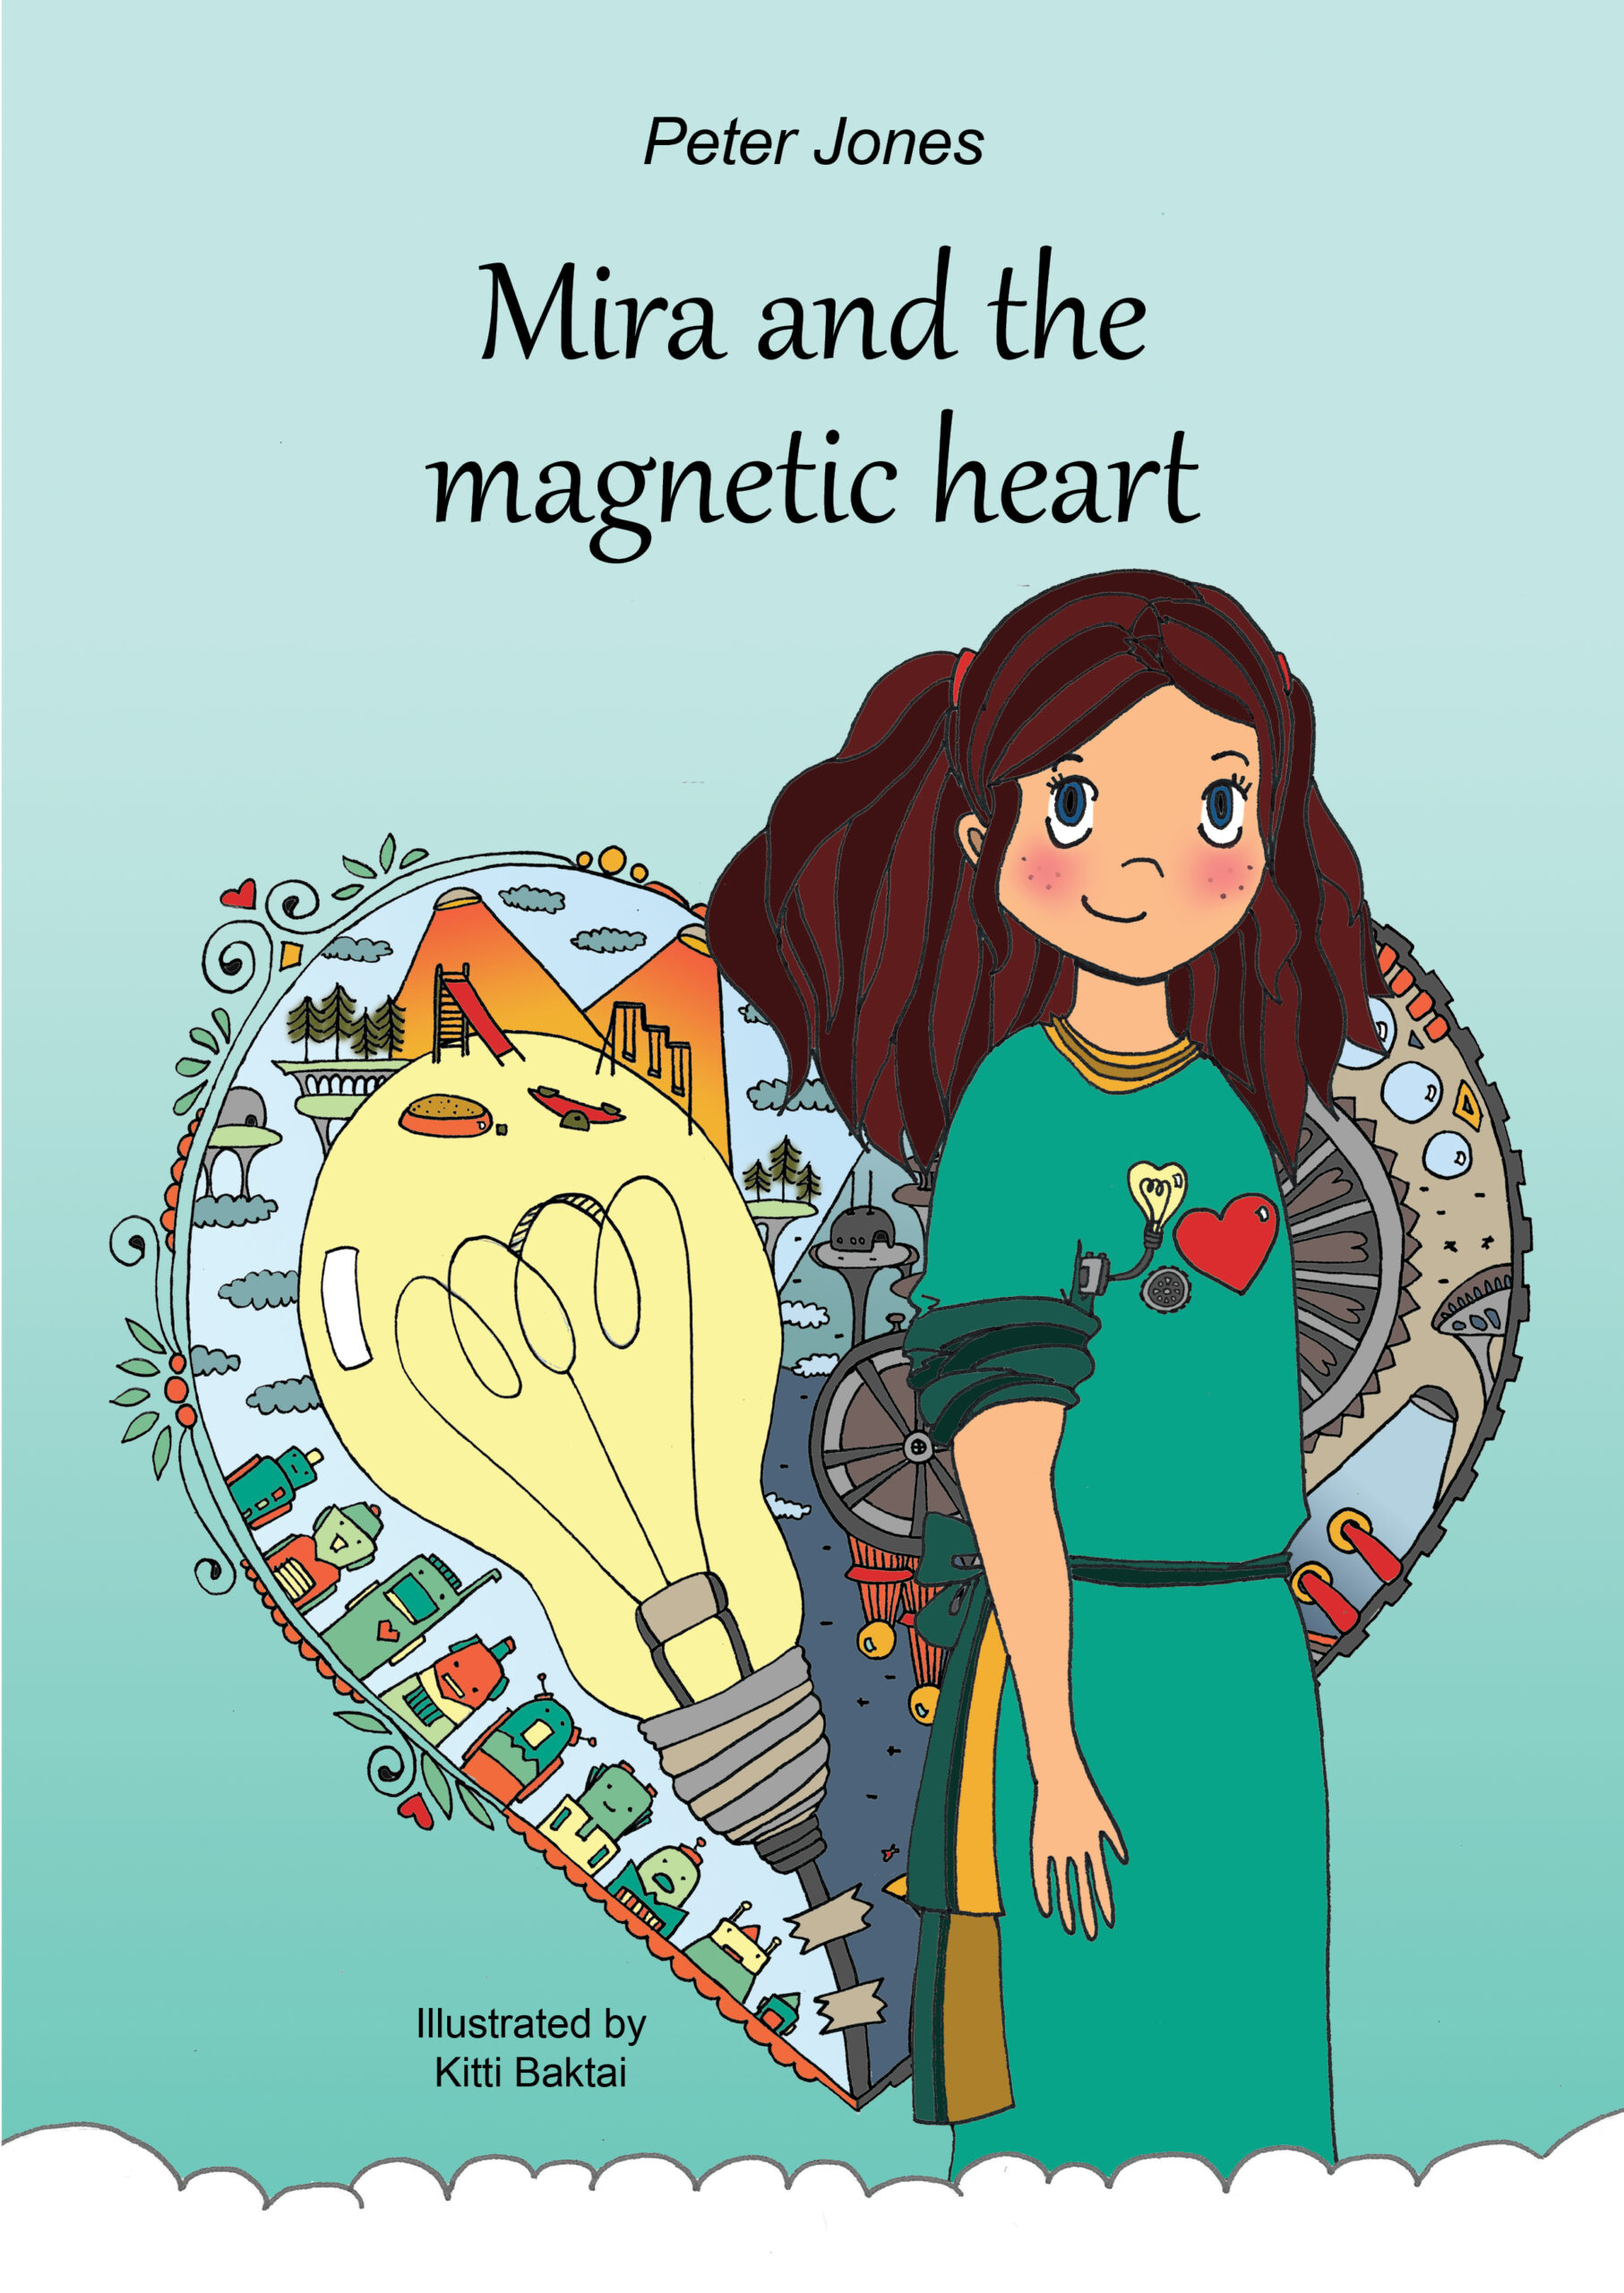 Mira and the magnetic heart